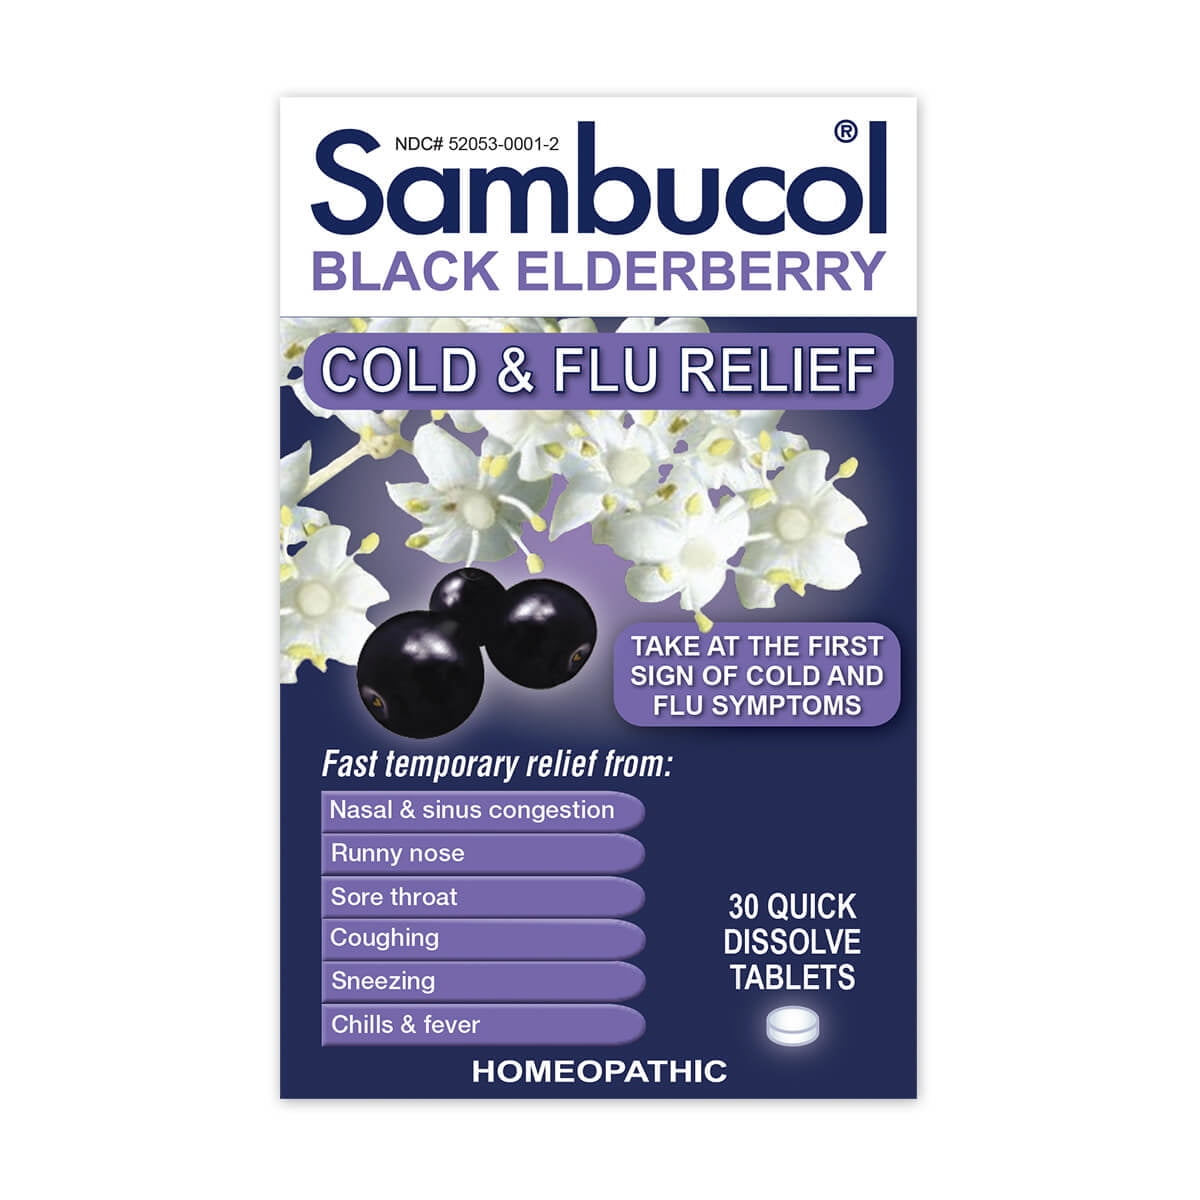 Sambucol Black Elderberry Homeopathic Cold & Flu Relief Tablets - 30 ct